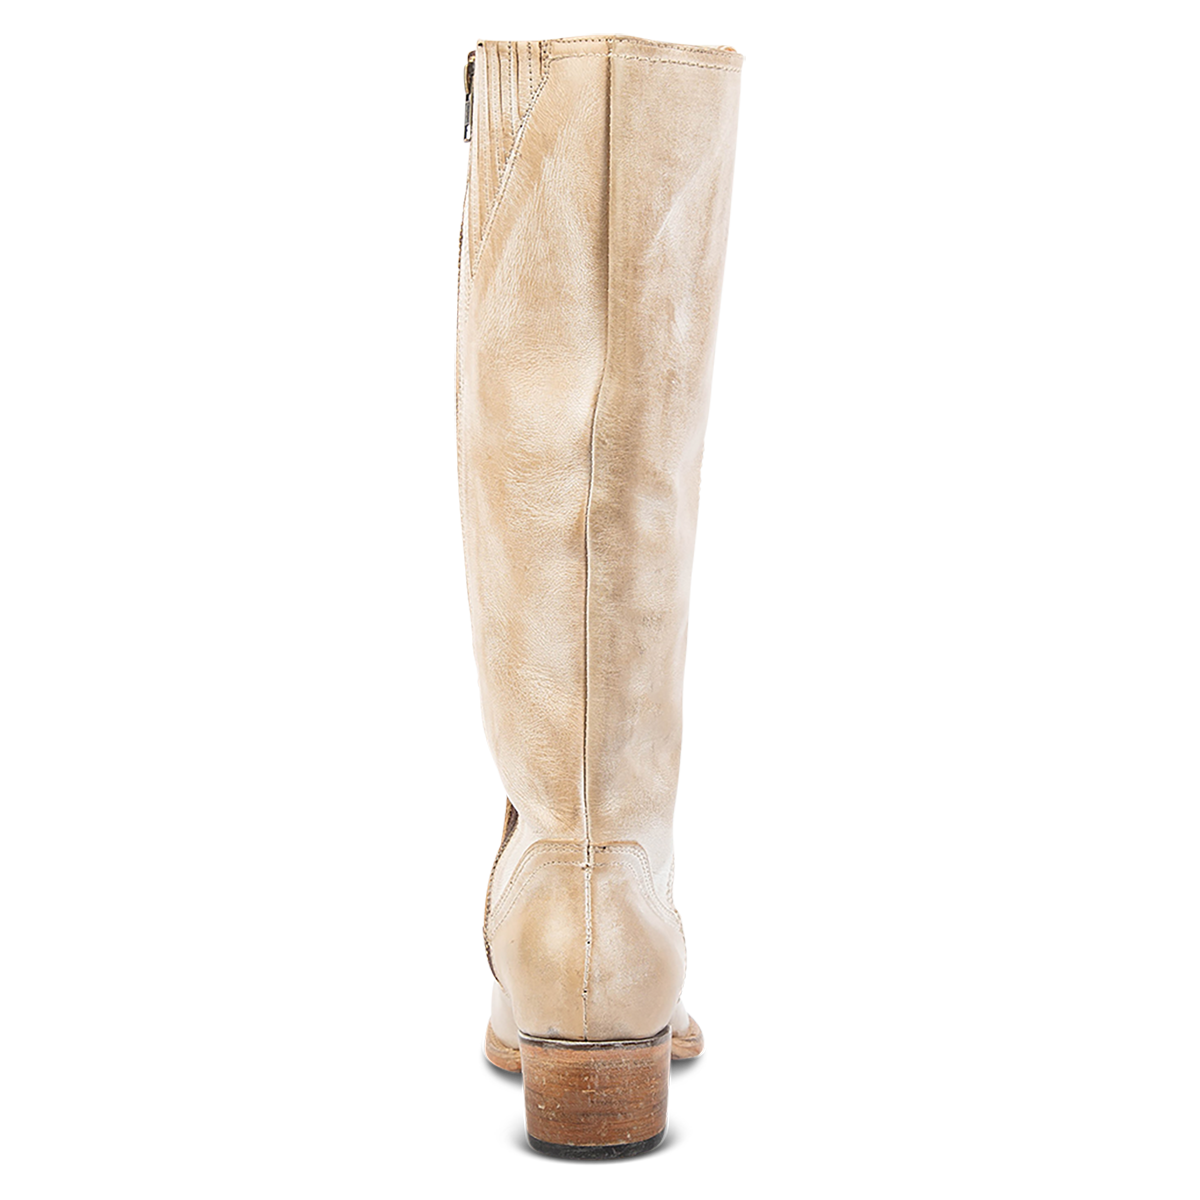 Back view showing a low block heel, gore detailing and a tall leather shaft on FREEBIRD women's Montana beige leather boot 